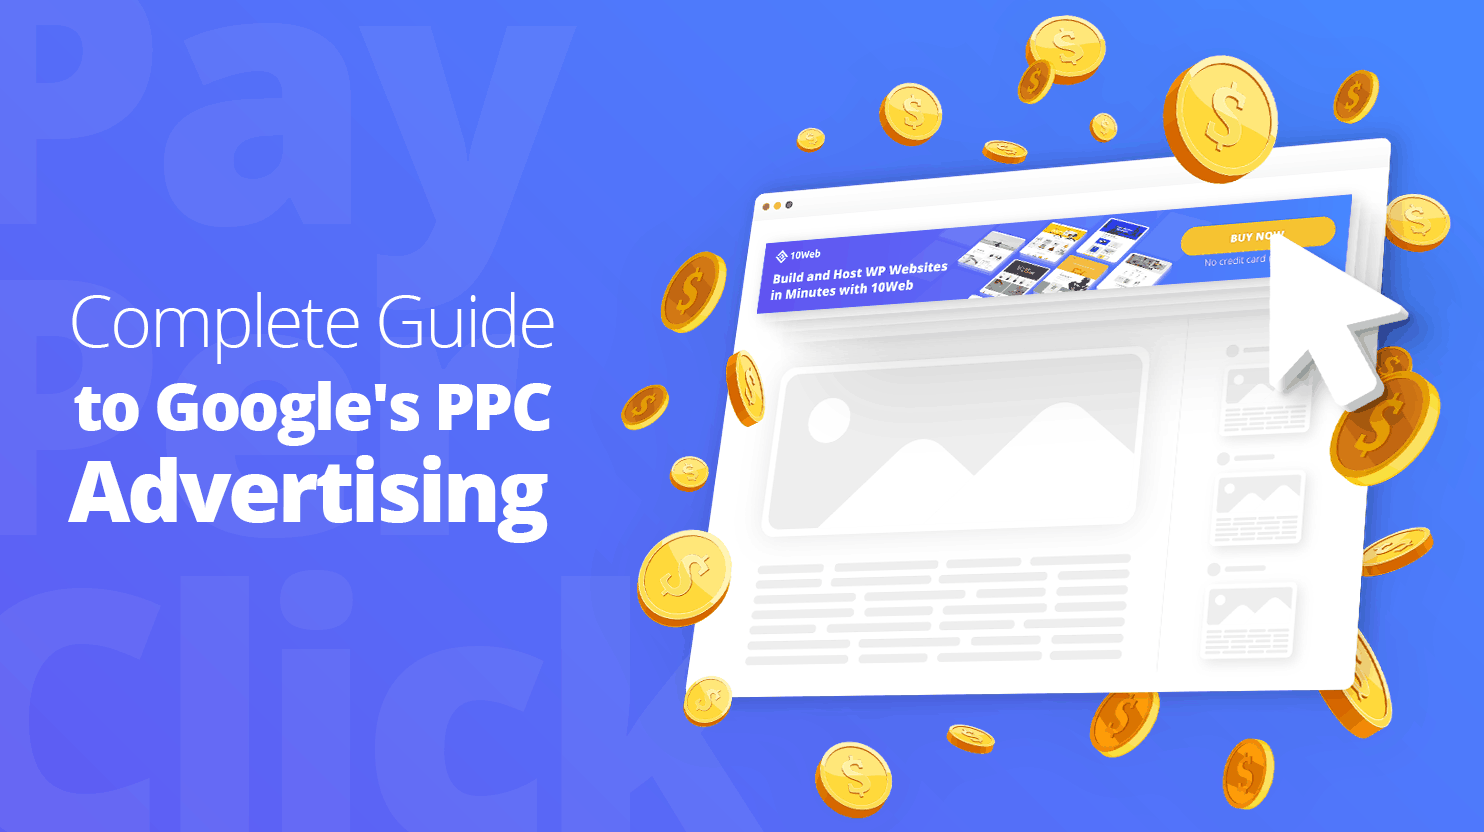 Complete Guide to Google's PPC Advertising